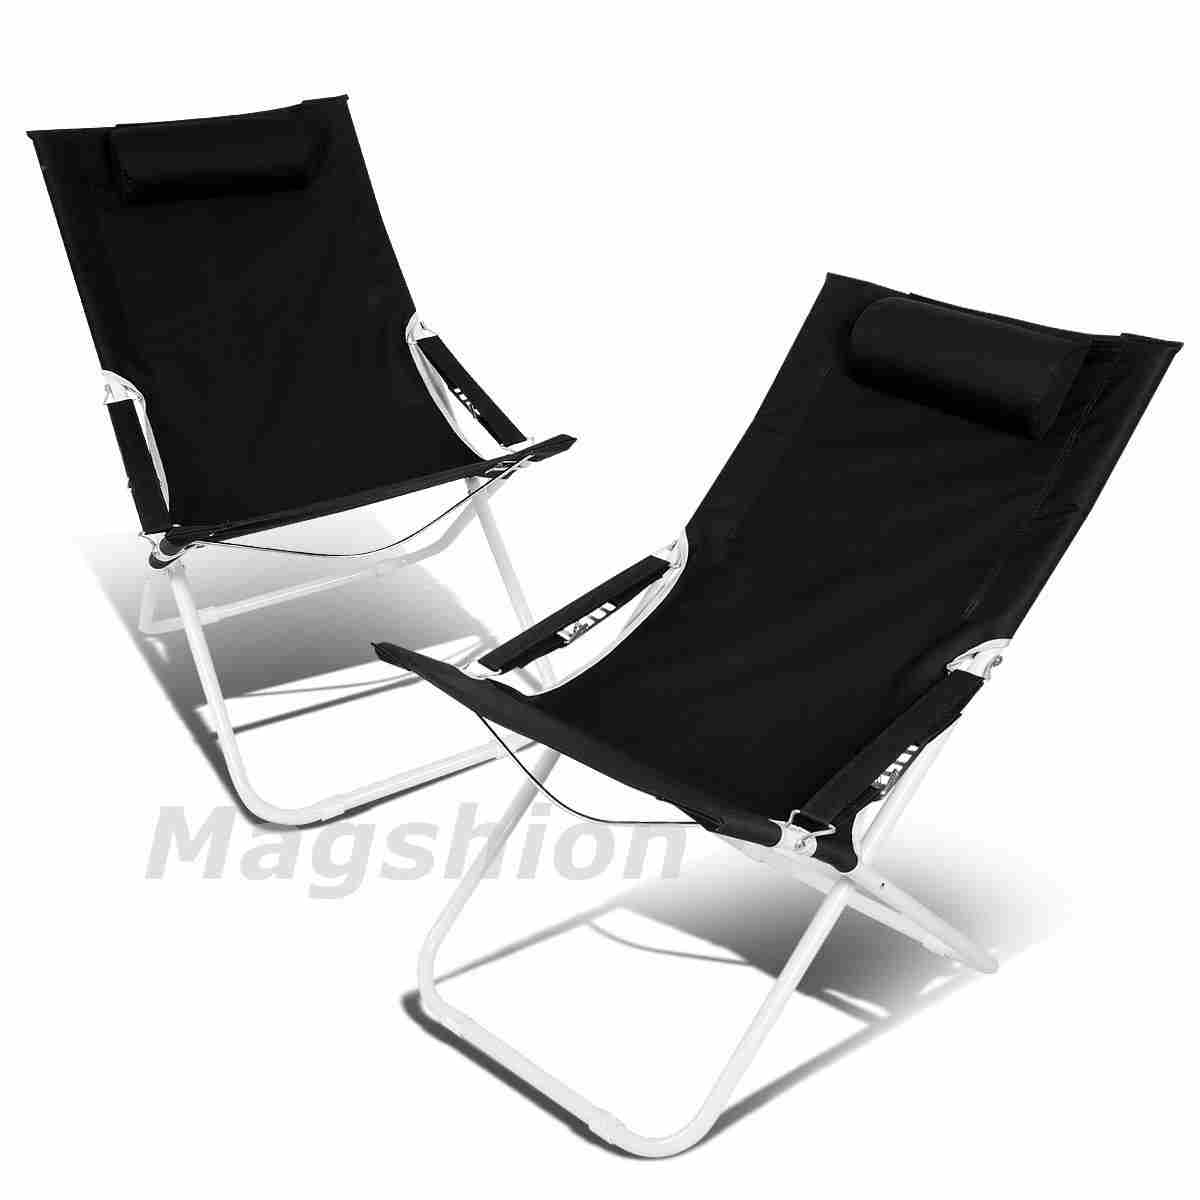 magshion-heavy-duty-reclining-camping-chairs